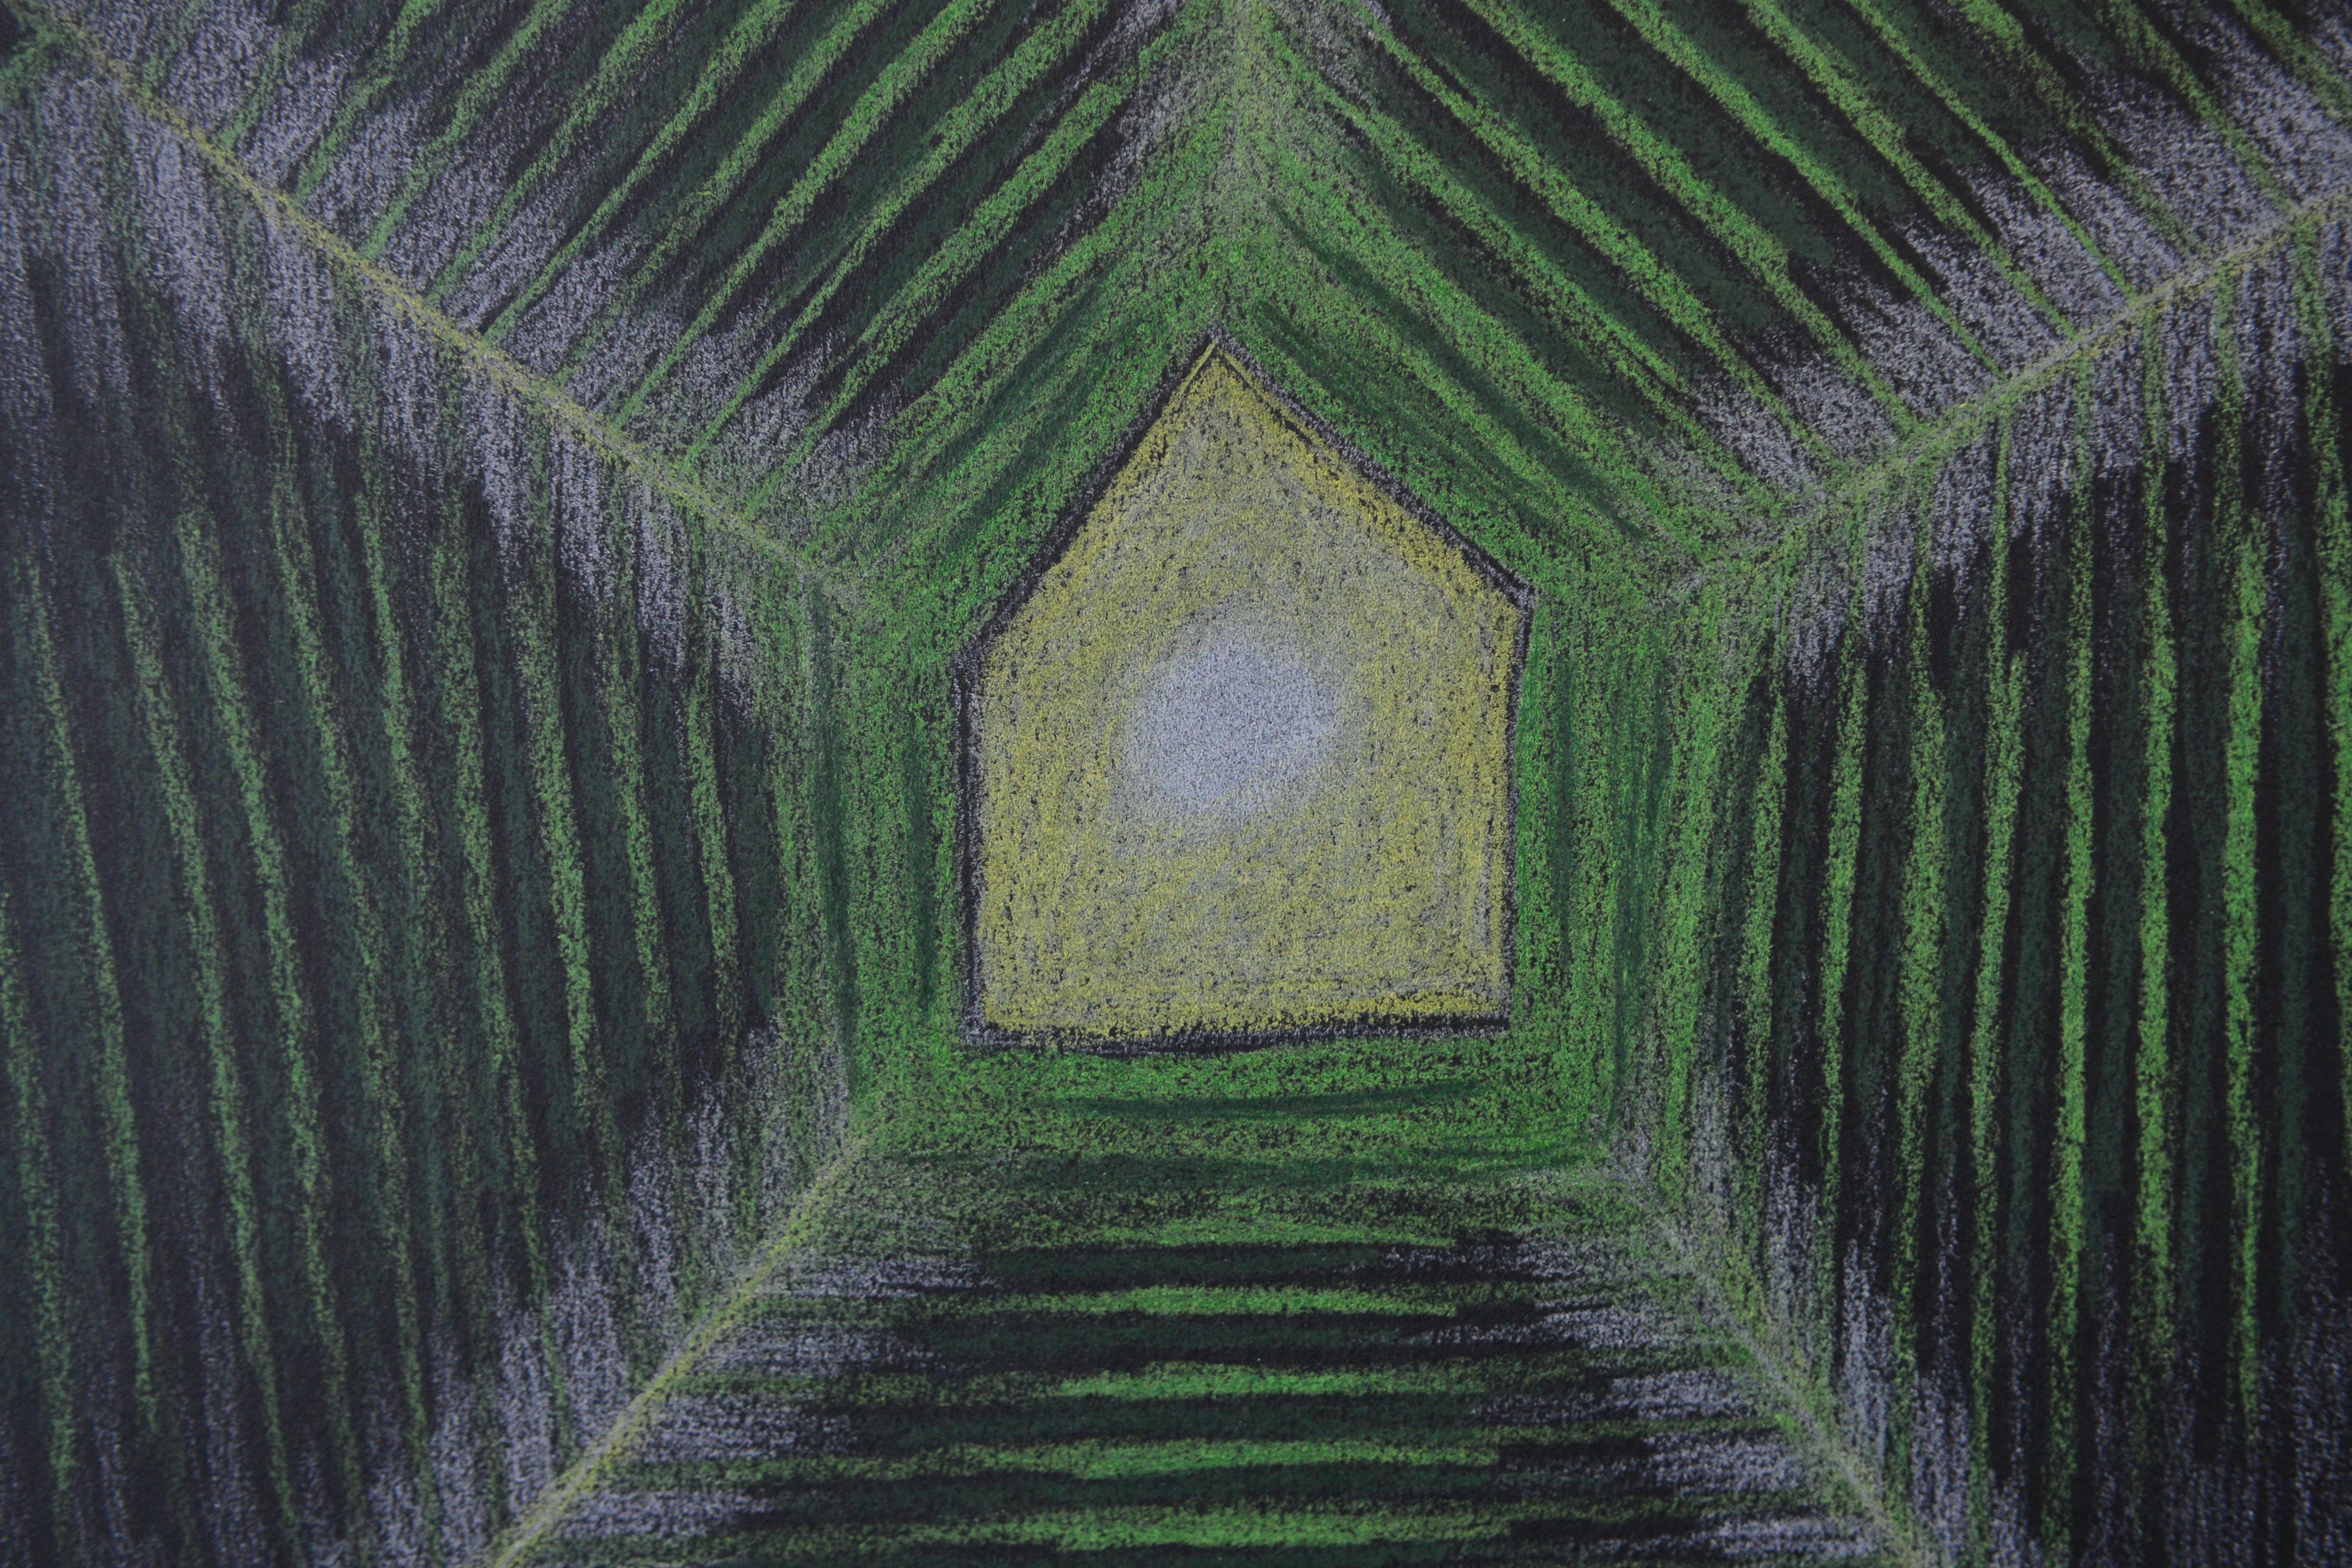 Opening Houses on Black 8, 2022. Coloured pencil on black paper, 20 x 20cm

Nicky Marais (b. 1962) is a Namibian artist, educator and activist. Marais is well-known for her abstract artworks created using a personal vocabulary of abstract forms and